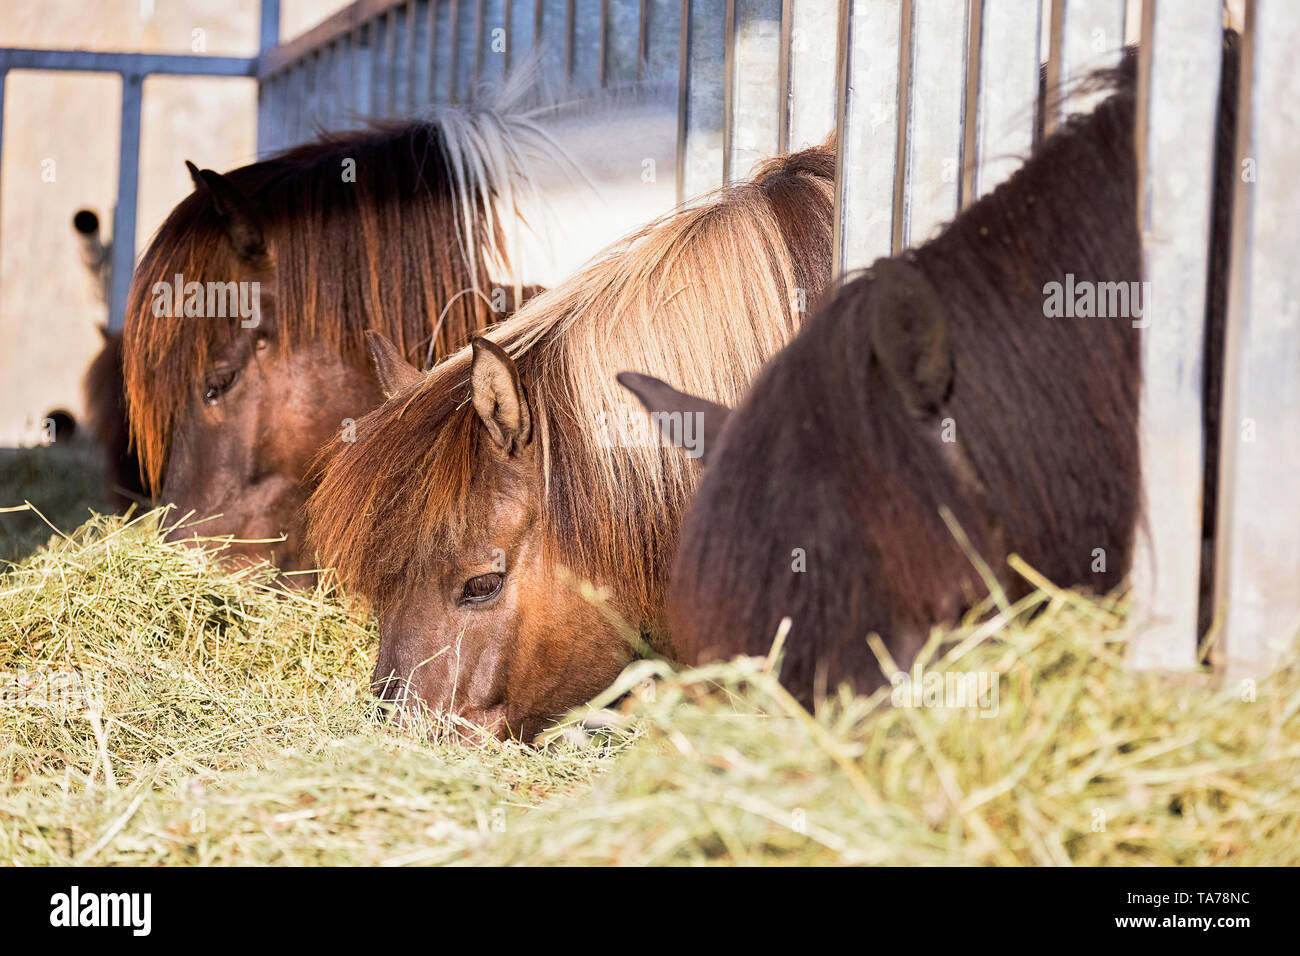 Icelandic Horse. Horses eating hay in an open stable. Austria Stock Photo